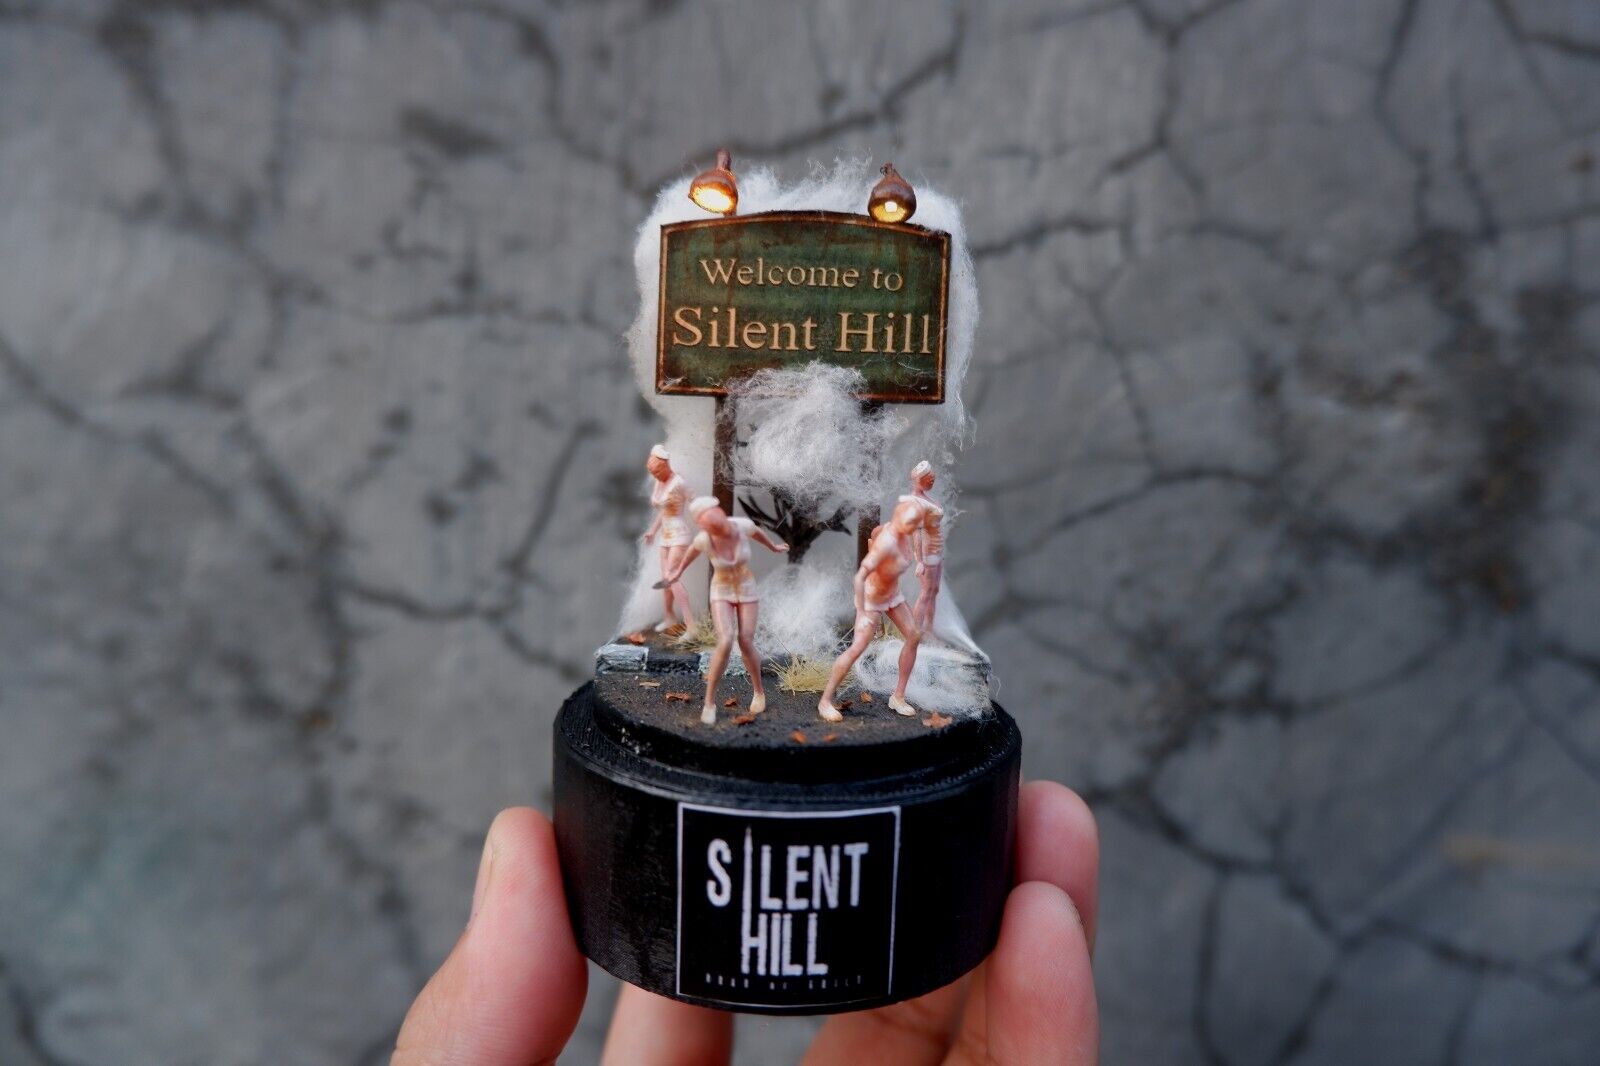 Welcome to Silent Hill diorama - Horor Scene - Nurse zombie monster - LED USB